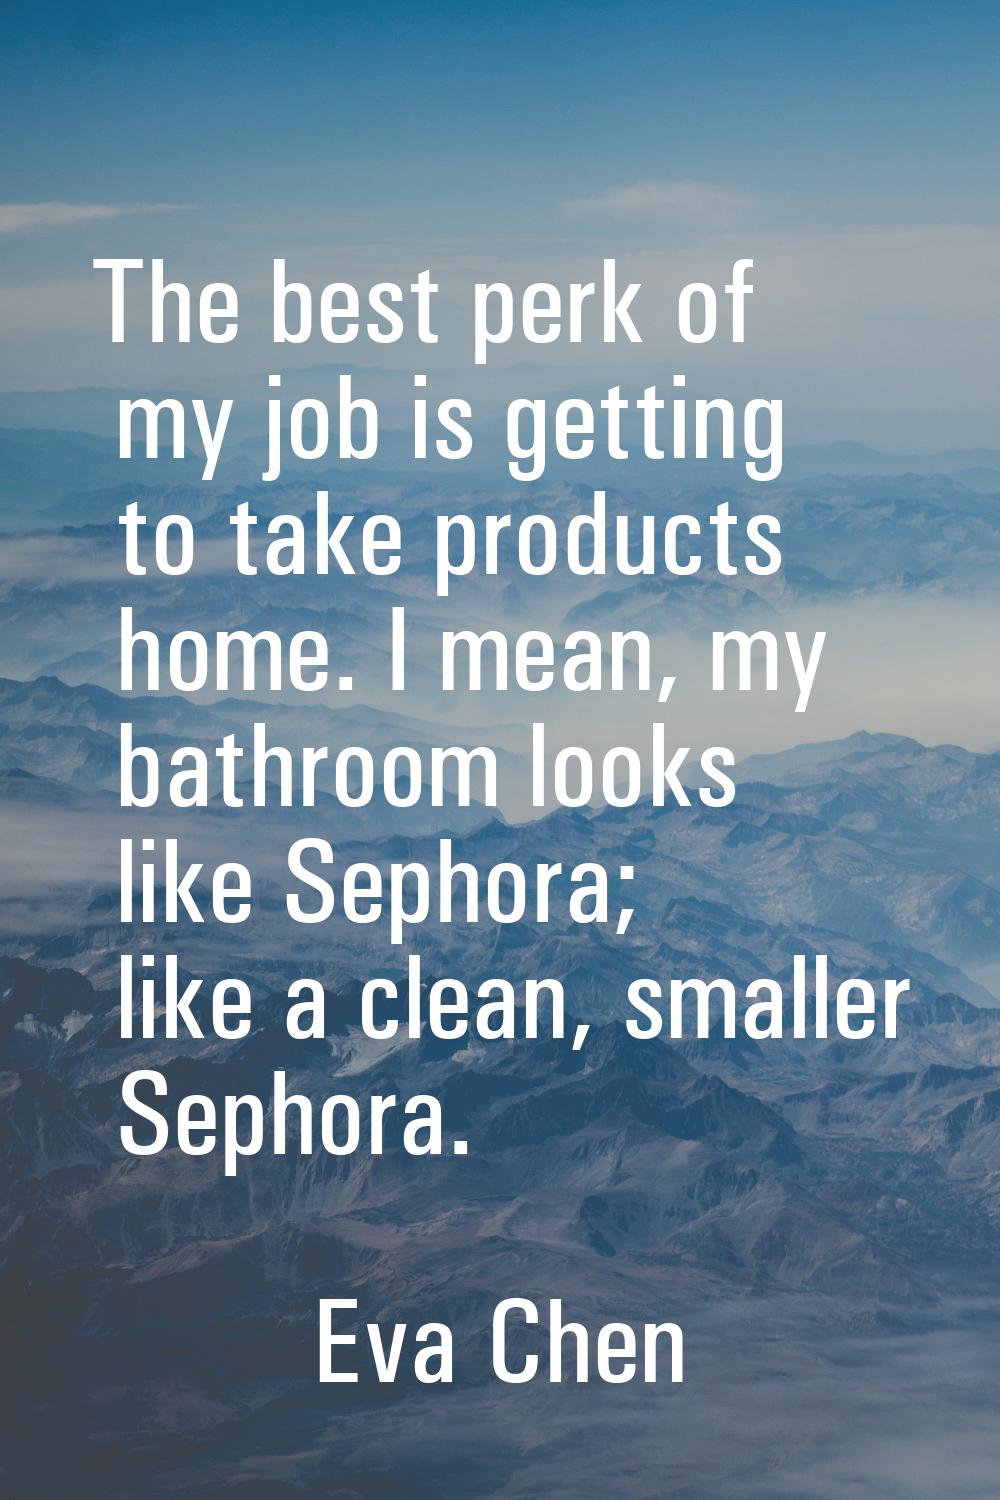 The best perk of my job is getting to take products home. I mean, my bathroom looks like Sephora; l